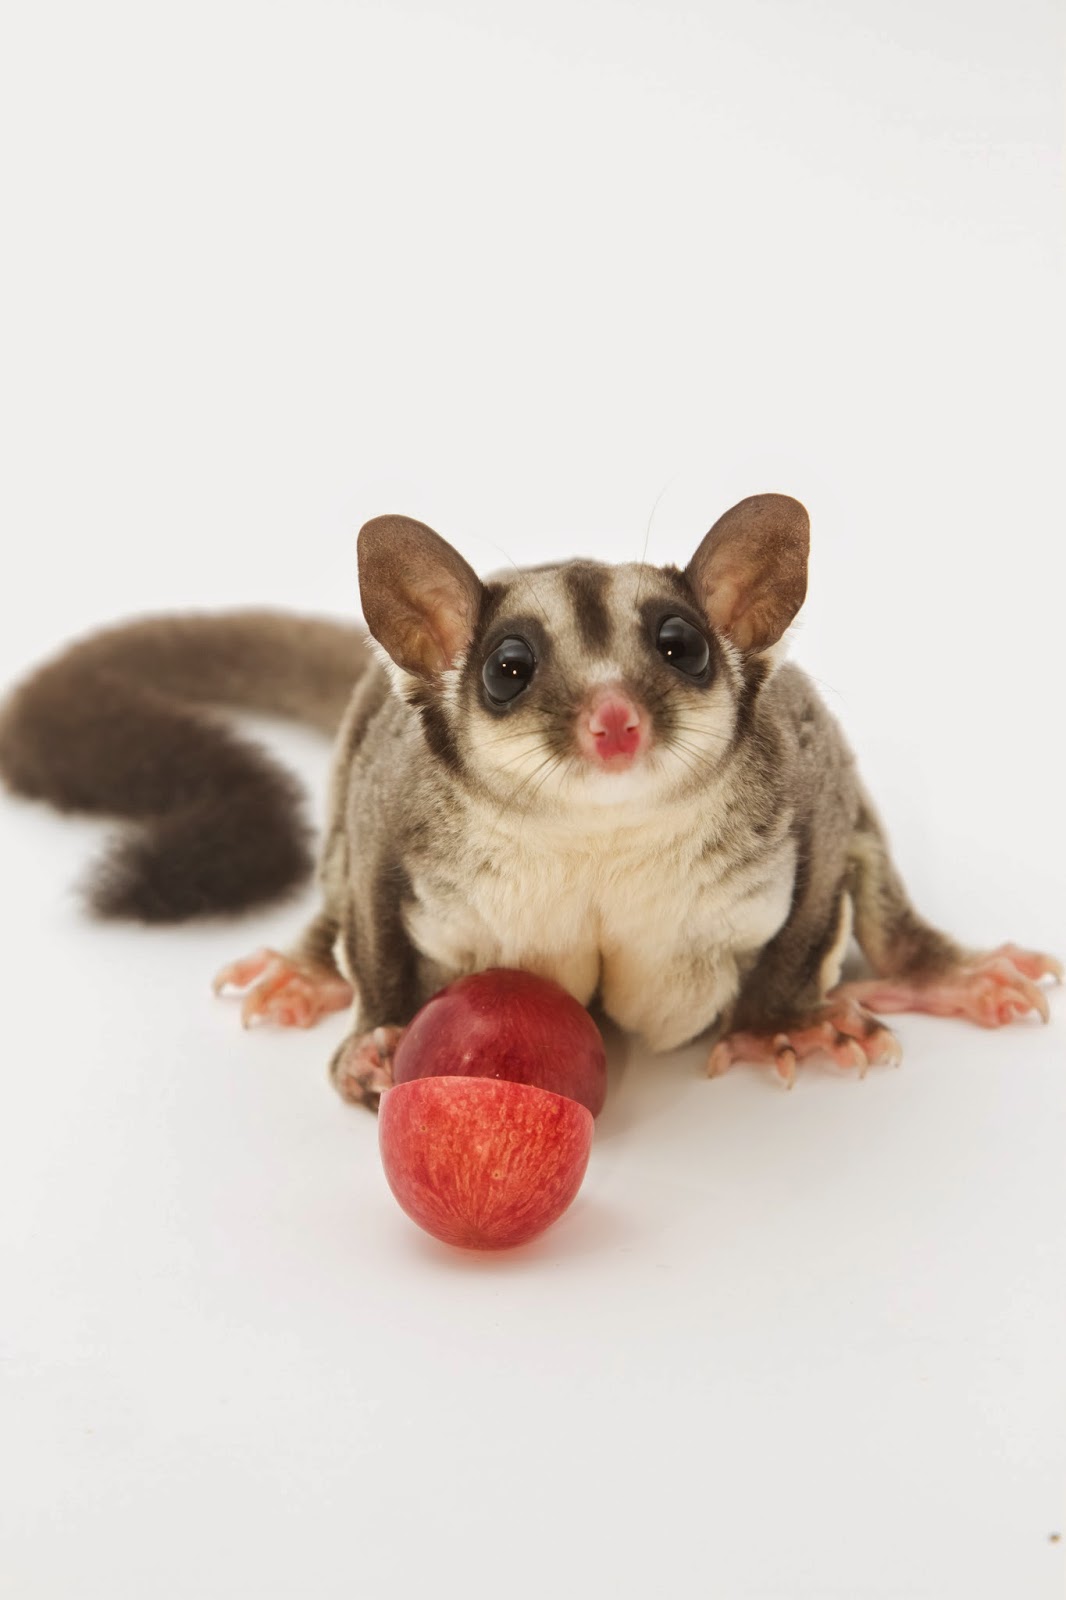 Different Breeds Of Sugar Gliders